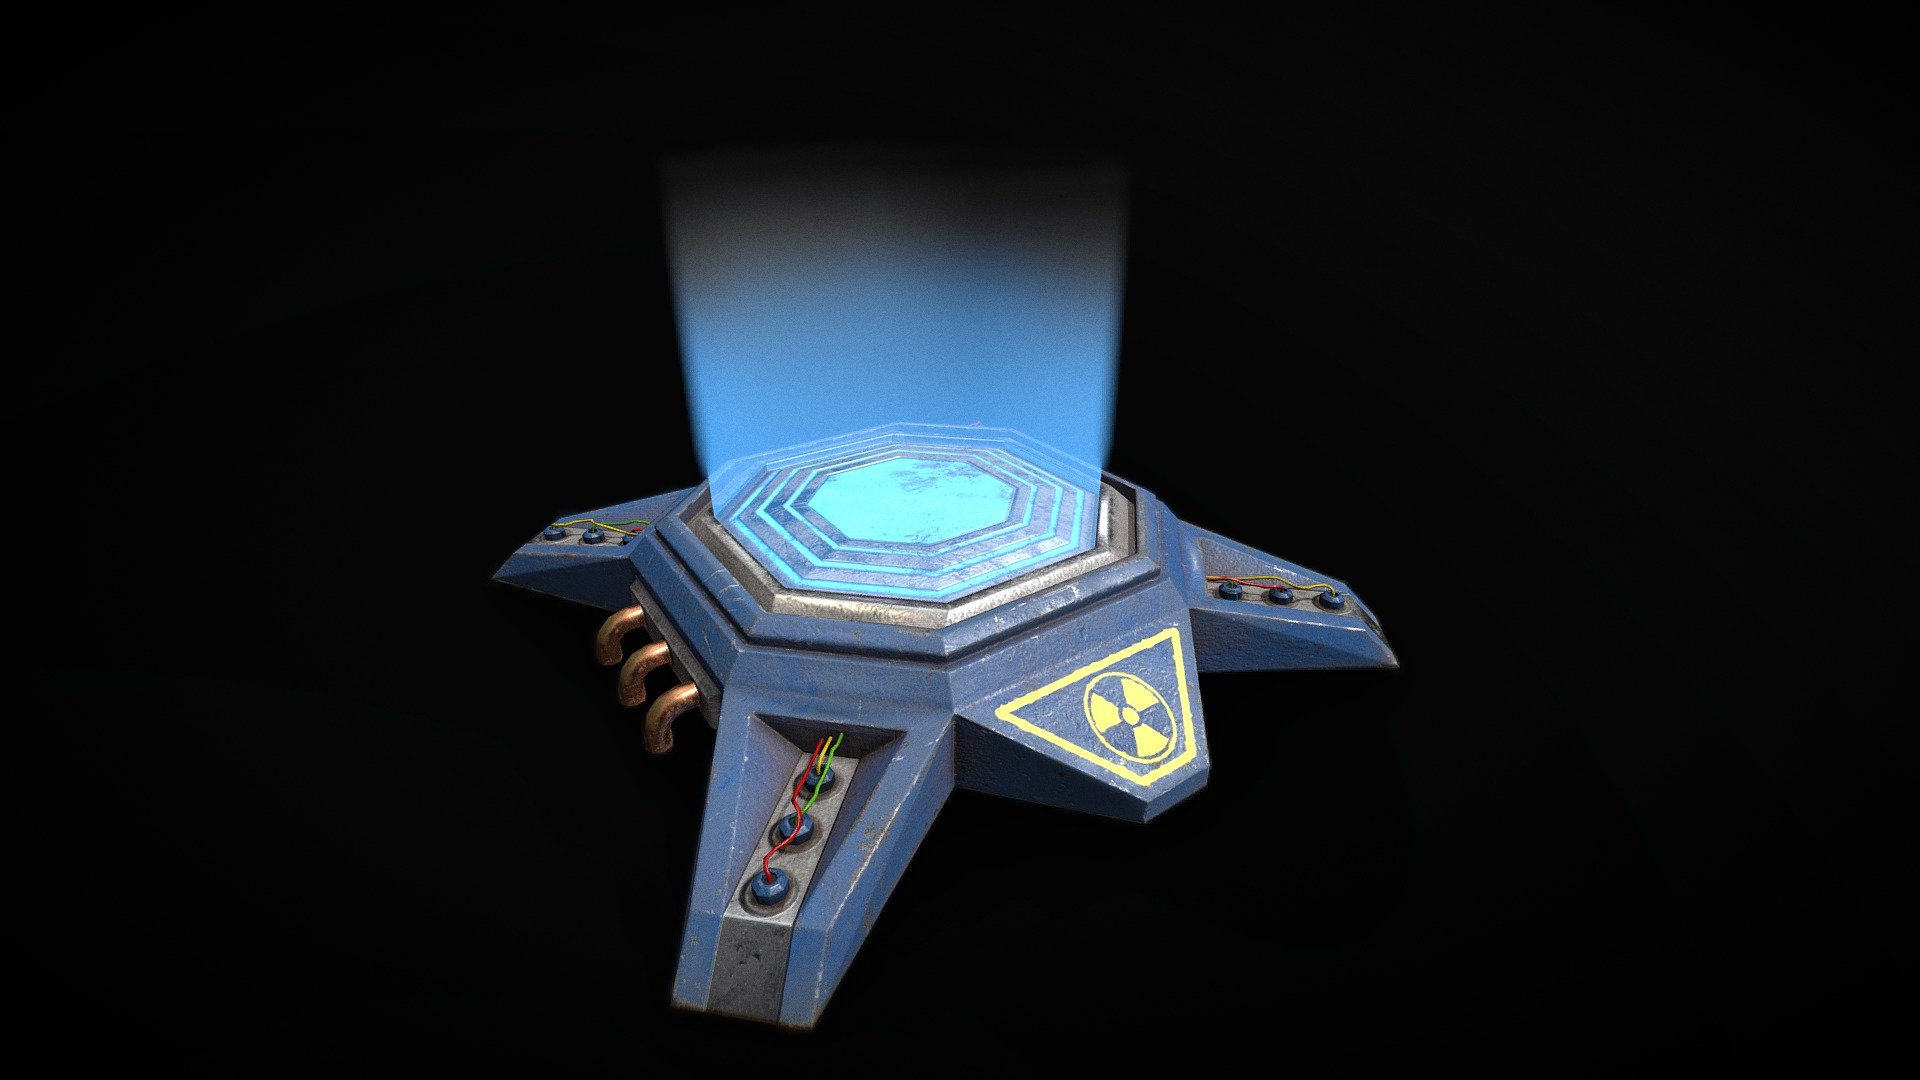 A Teleportation device I designed and modelled for a level I was blocking out in Unreal Engine 4 in university.

Should fit nicely into any sort of Arena styled FPS project so feel free to download 3d model